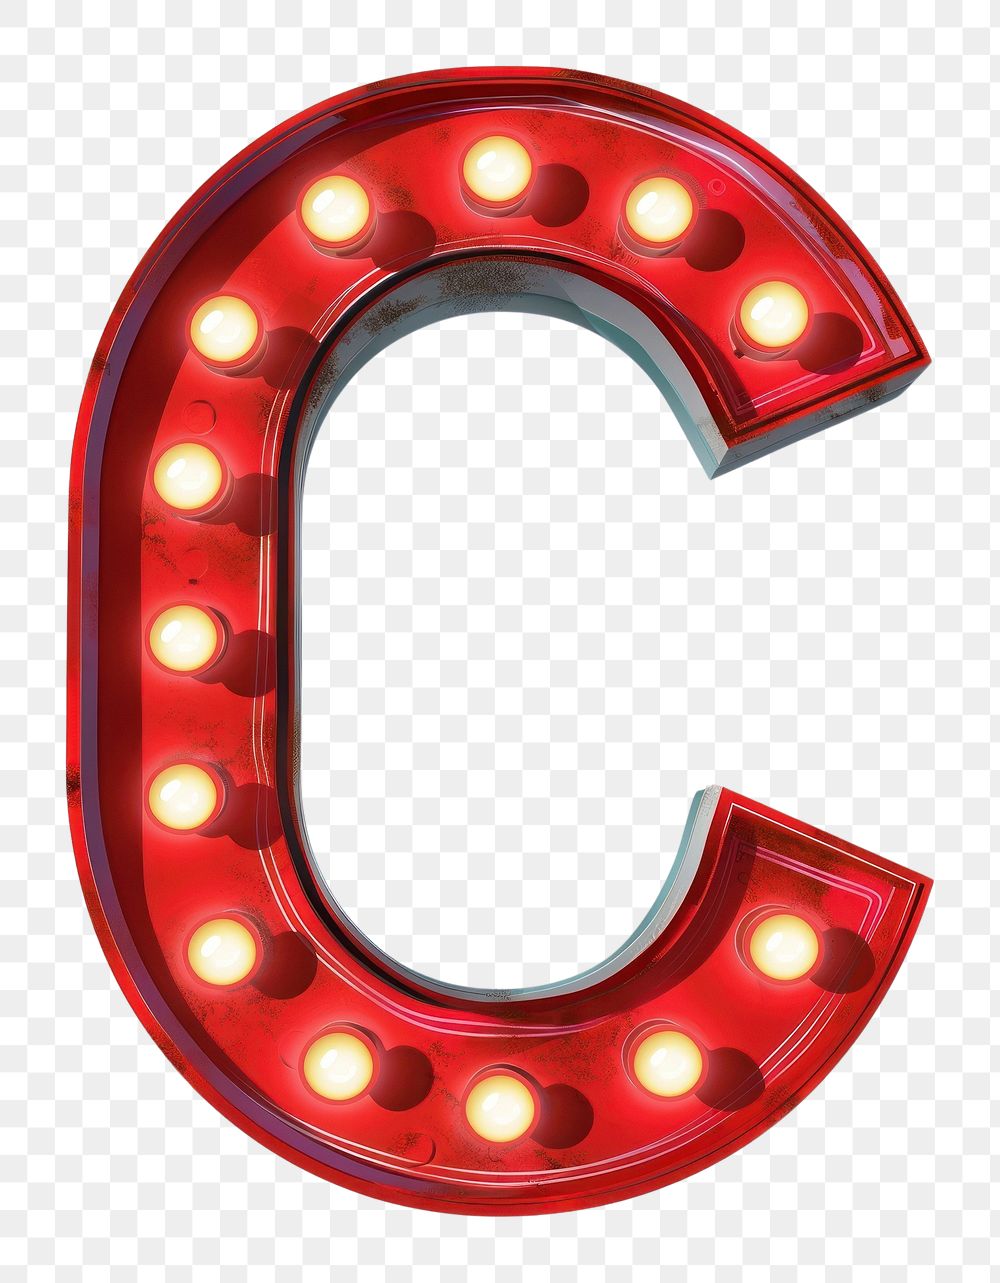 Theater sign letter C red white background illuminated.